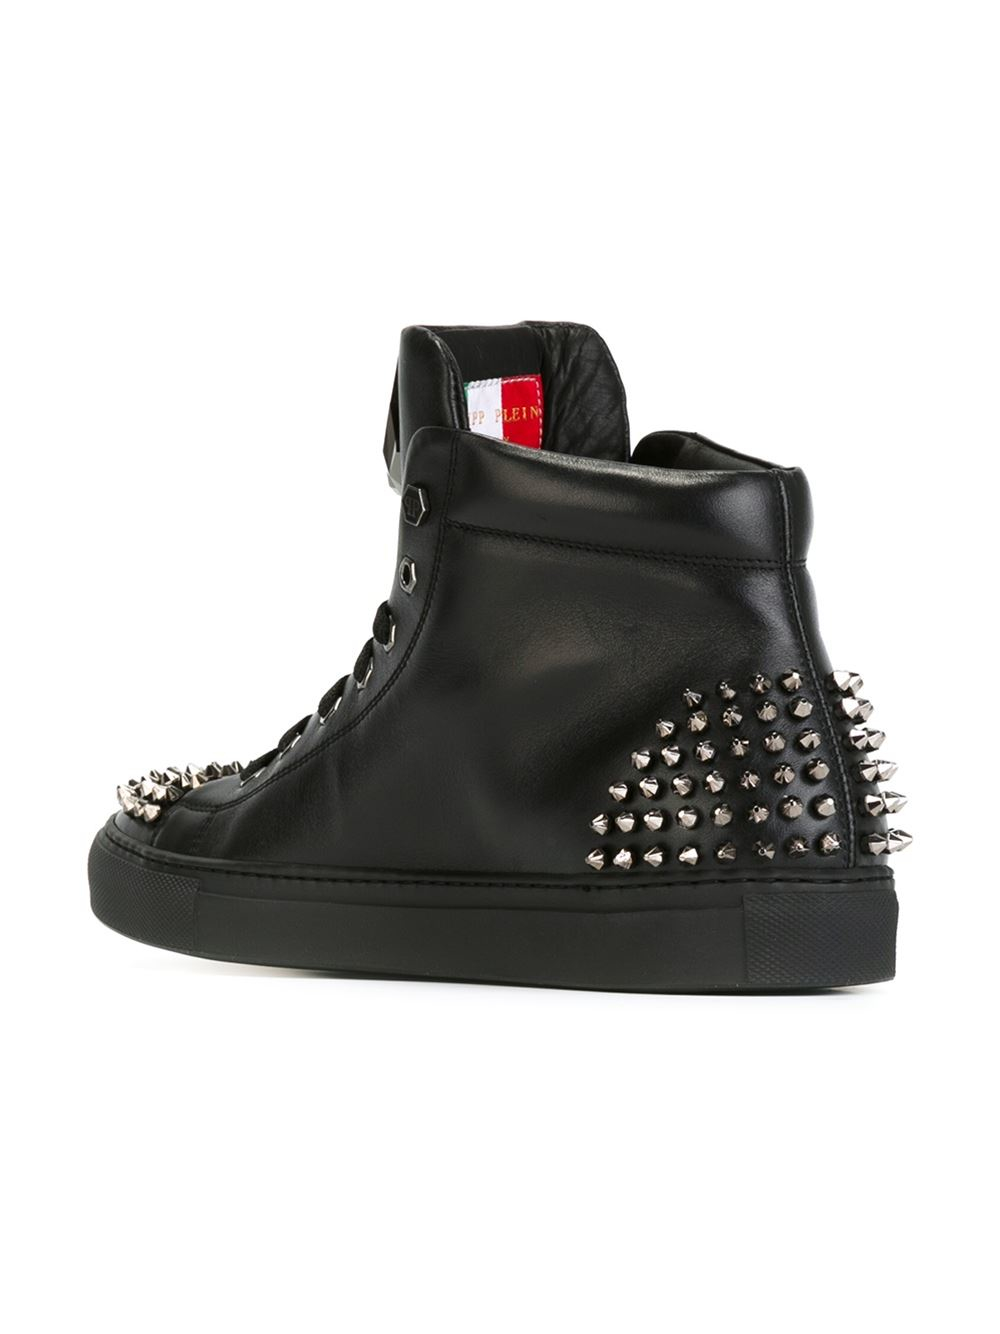 Philipp plein Spike-Studded Leather High-Top Sneakers in Black for Men ...